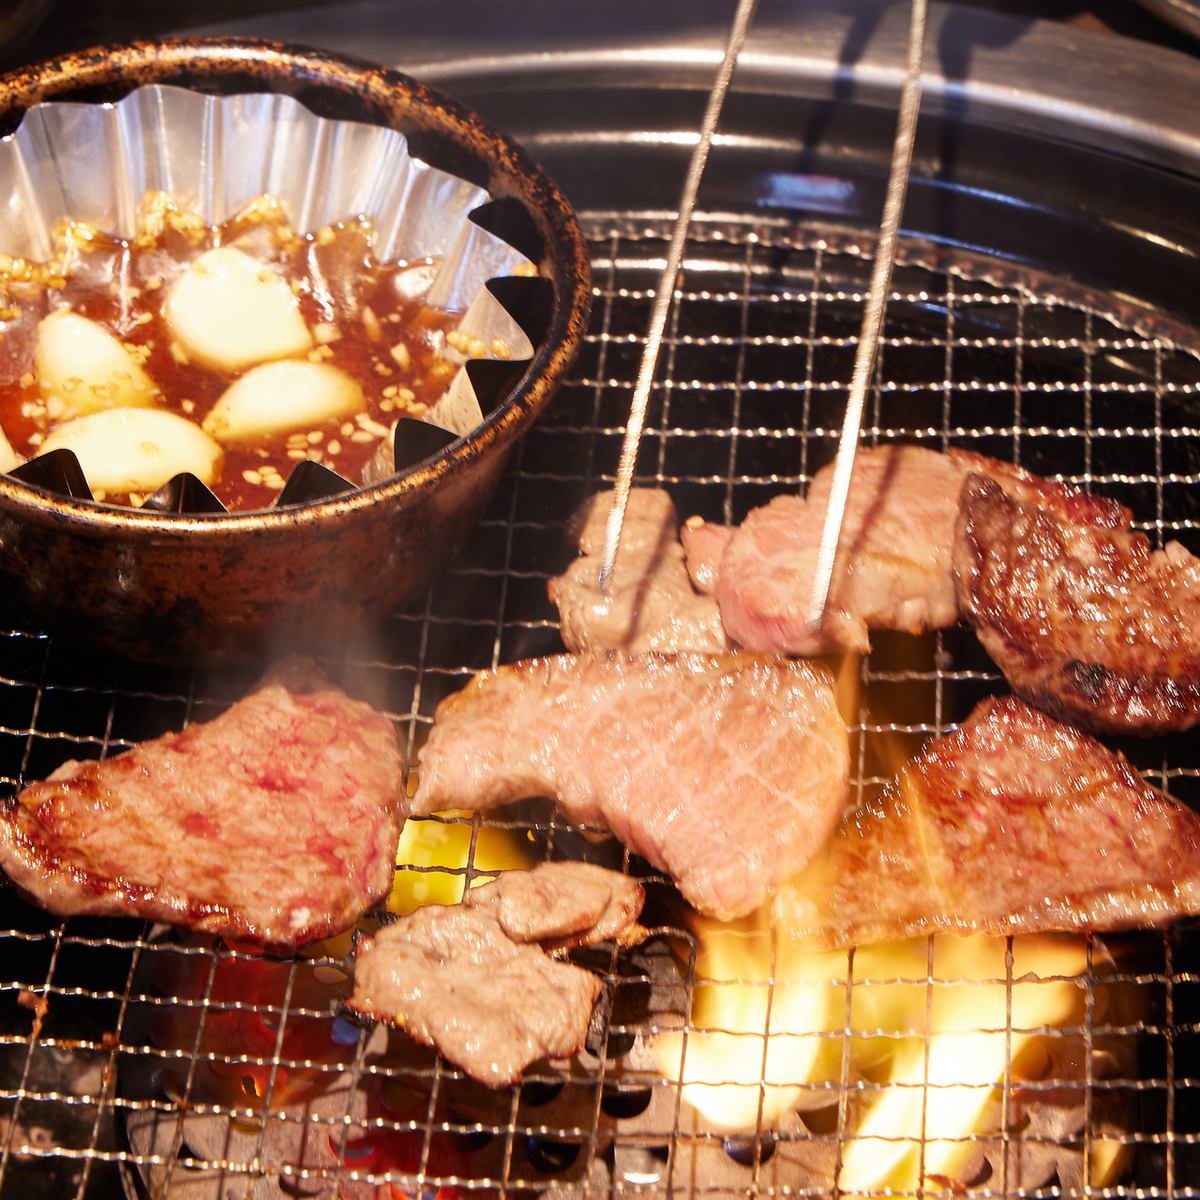 Yakiniku eaten with homemade <simmered sauce> is delicious and addictive !!